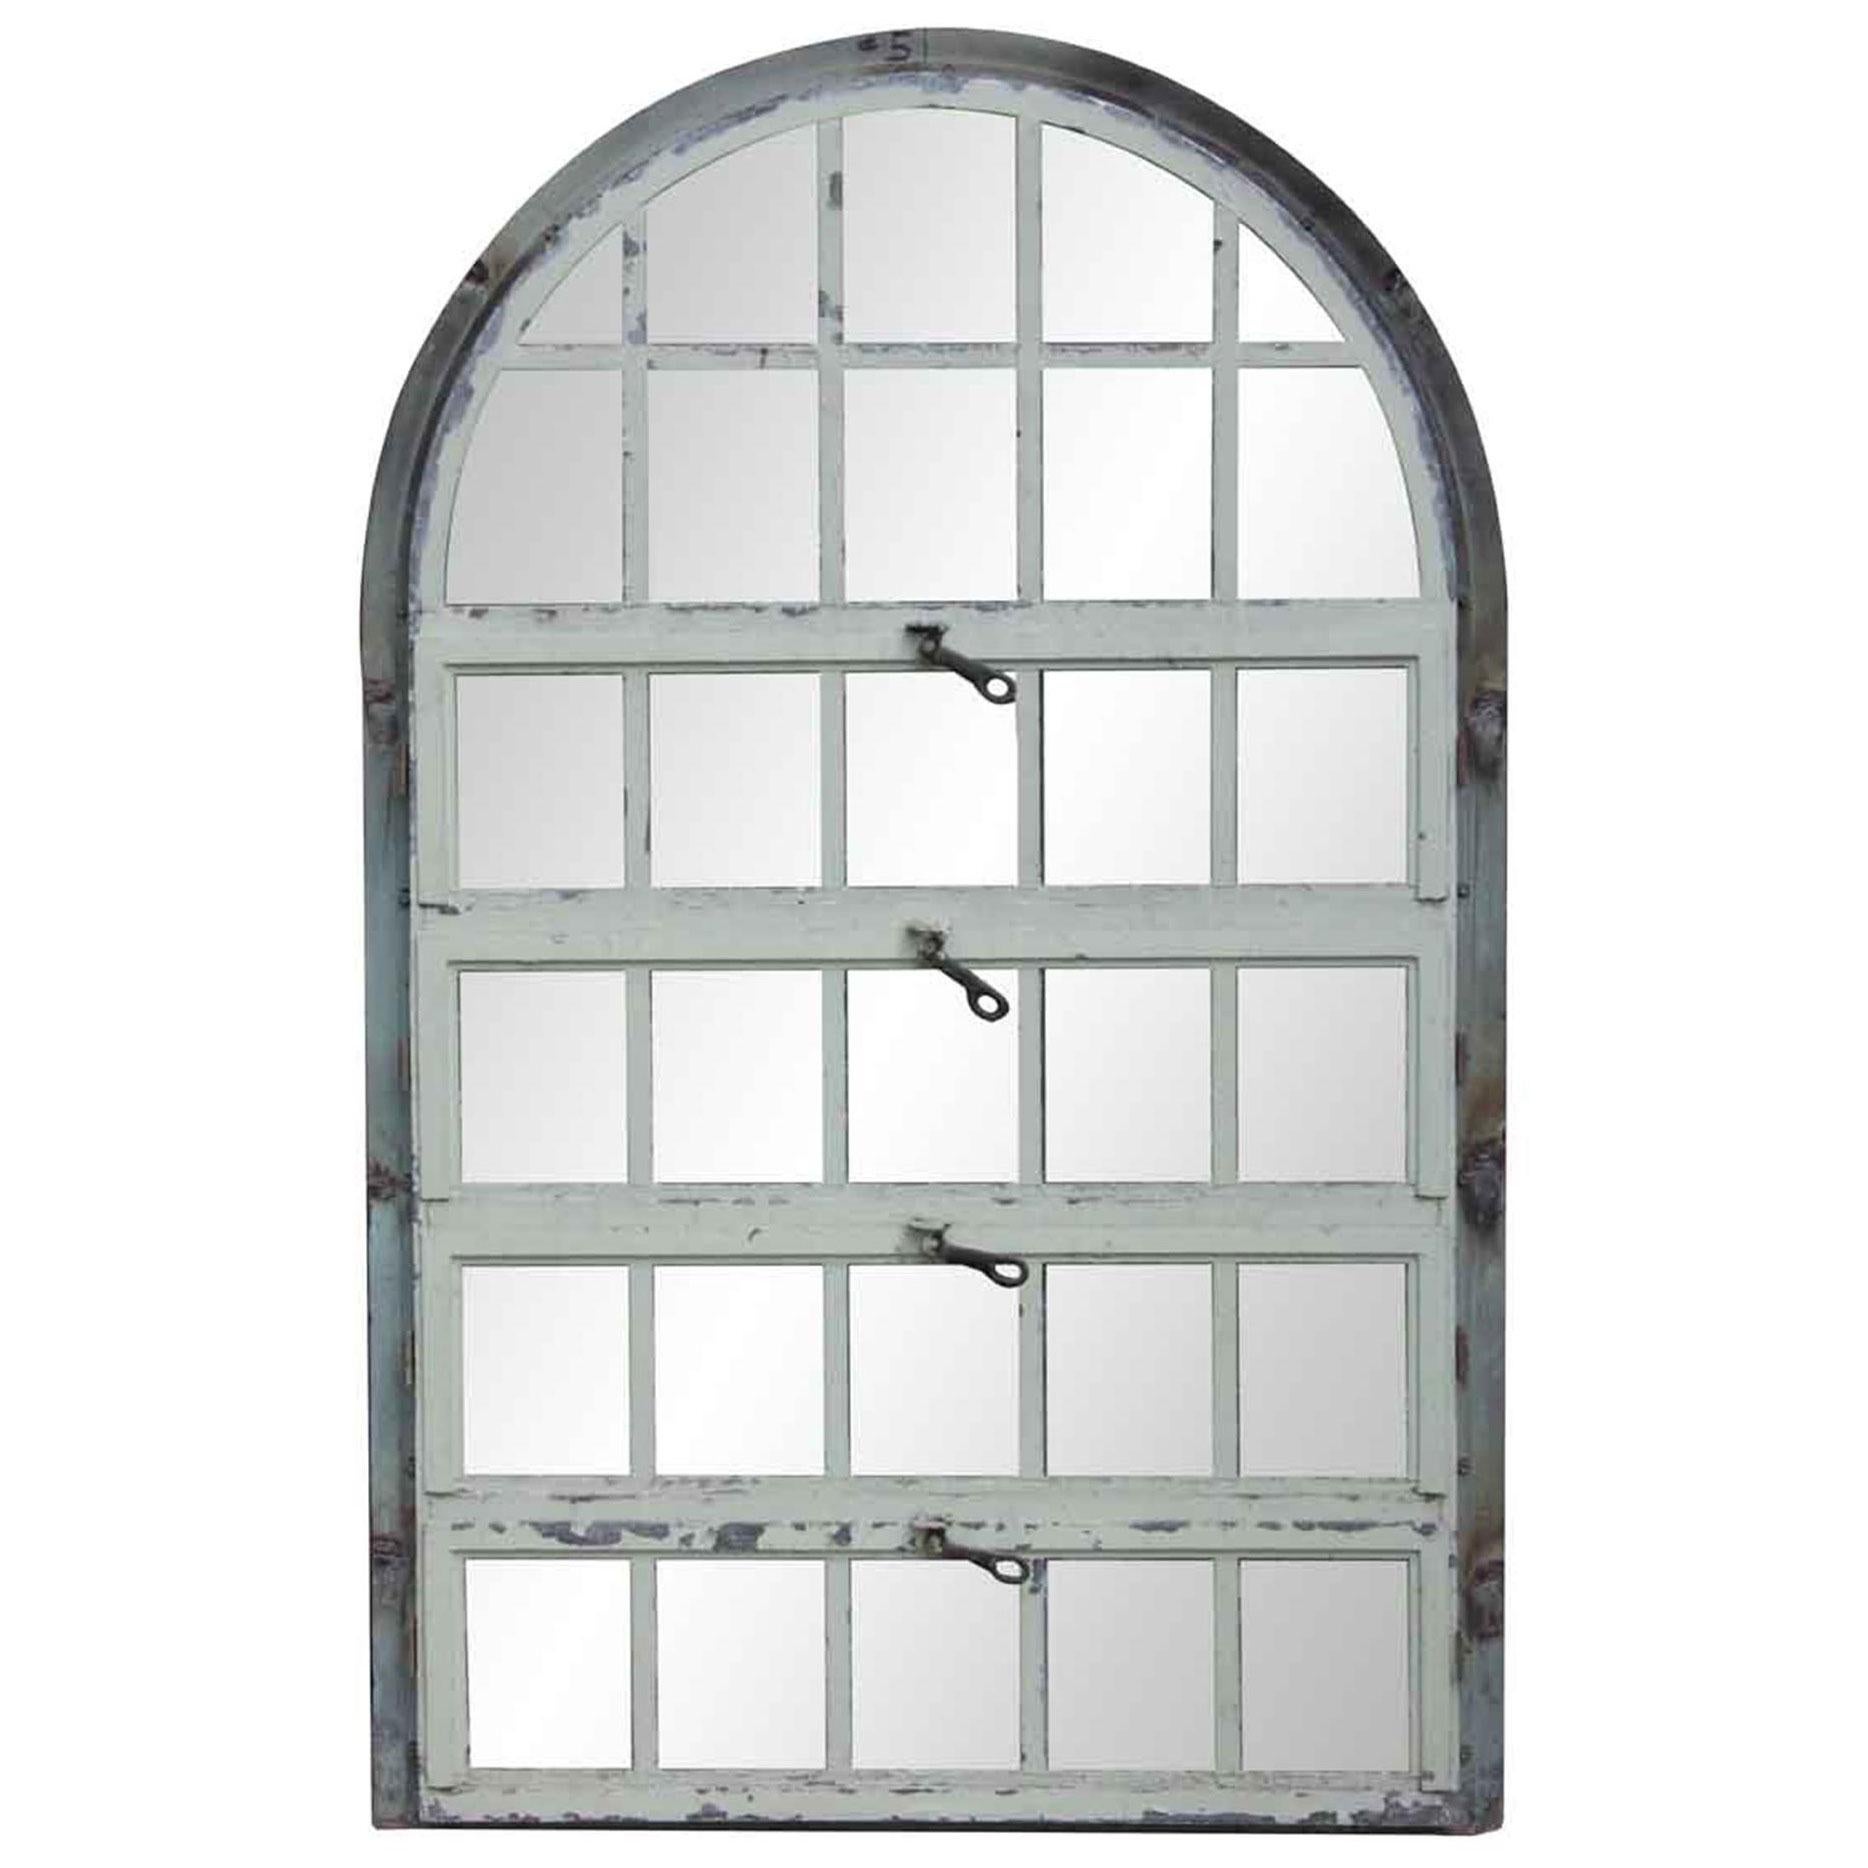 1930 Steel Palladian Window with Horizontal Openings and Frame from New Jersey